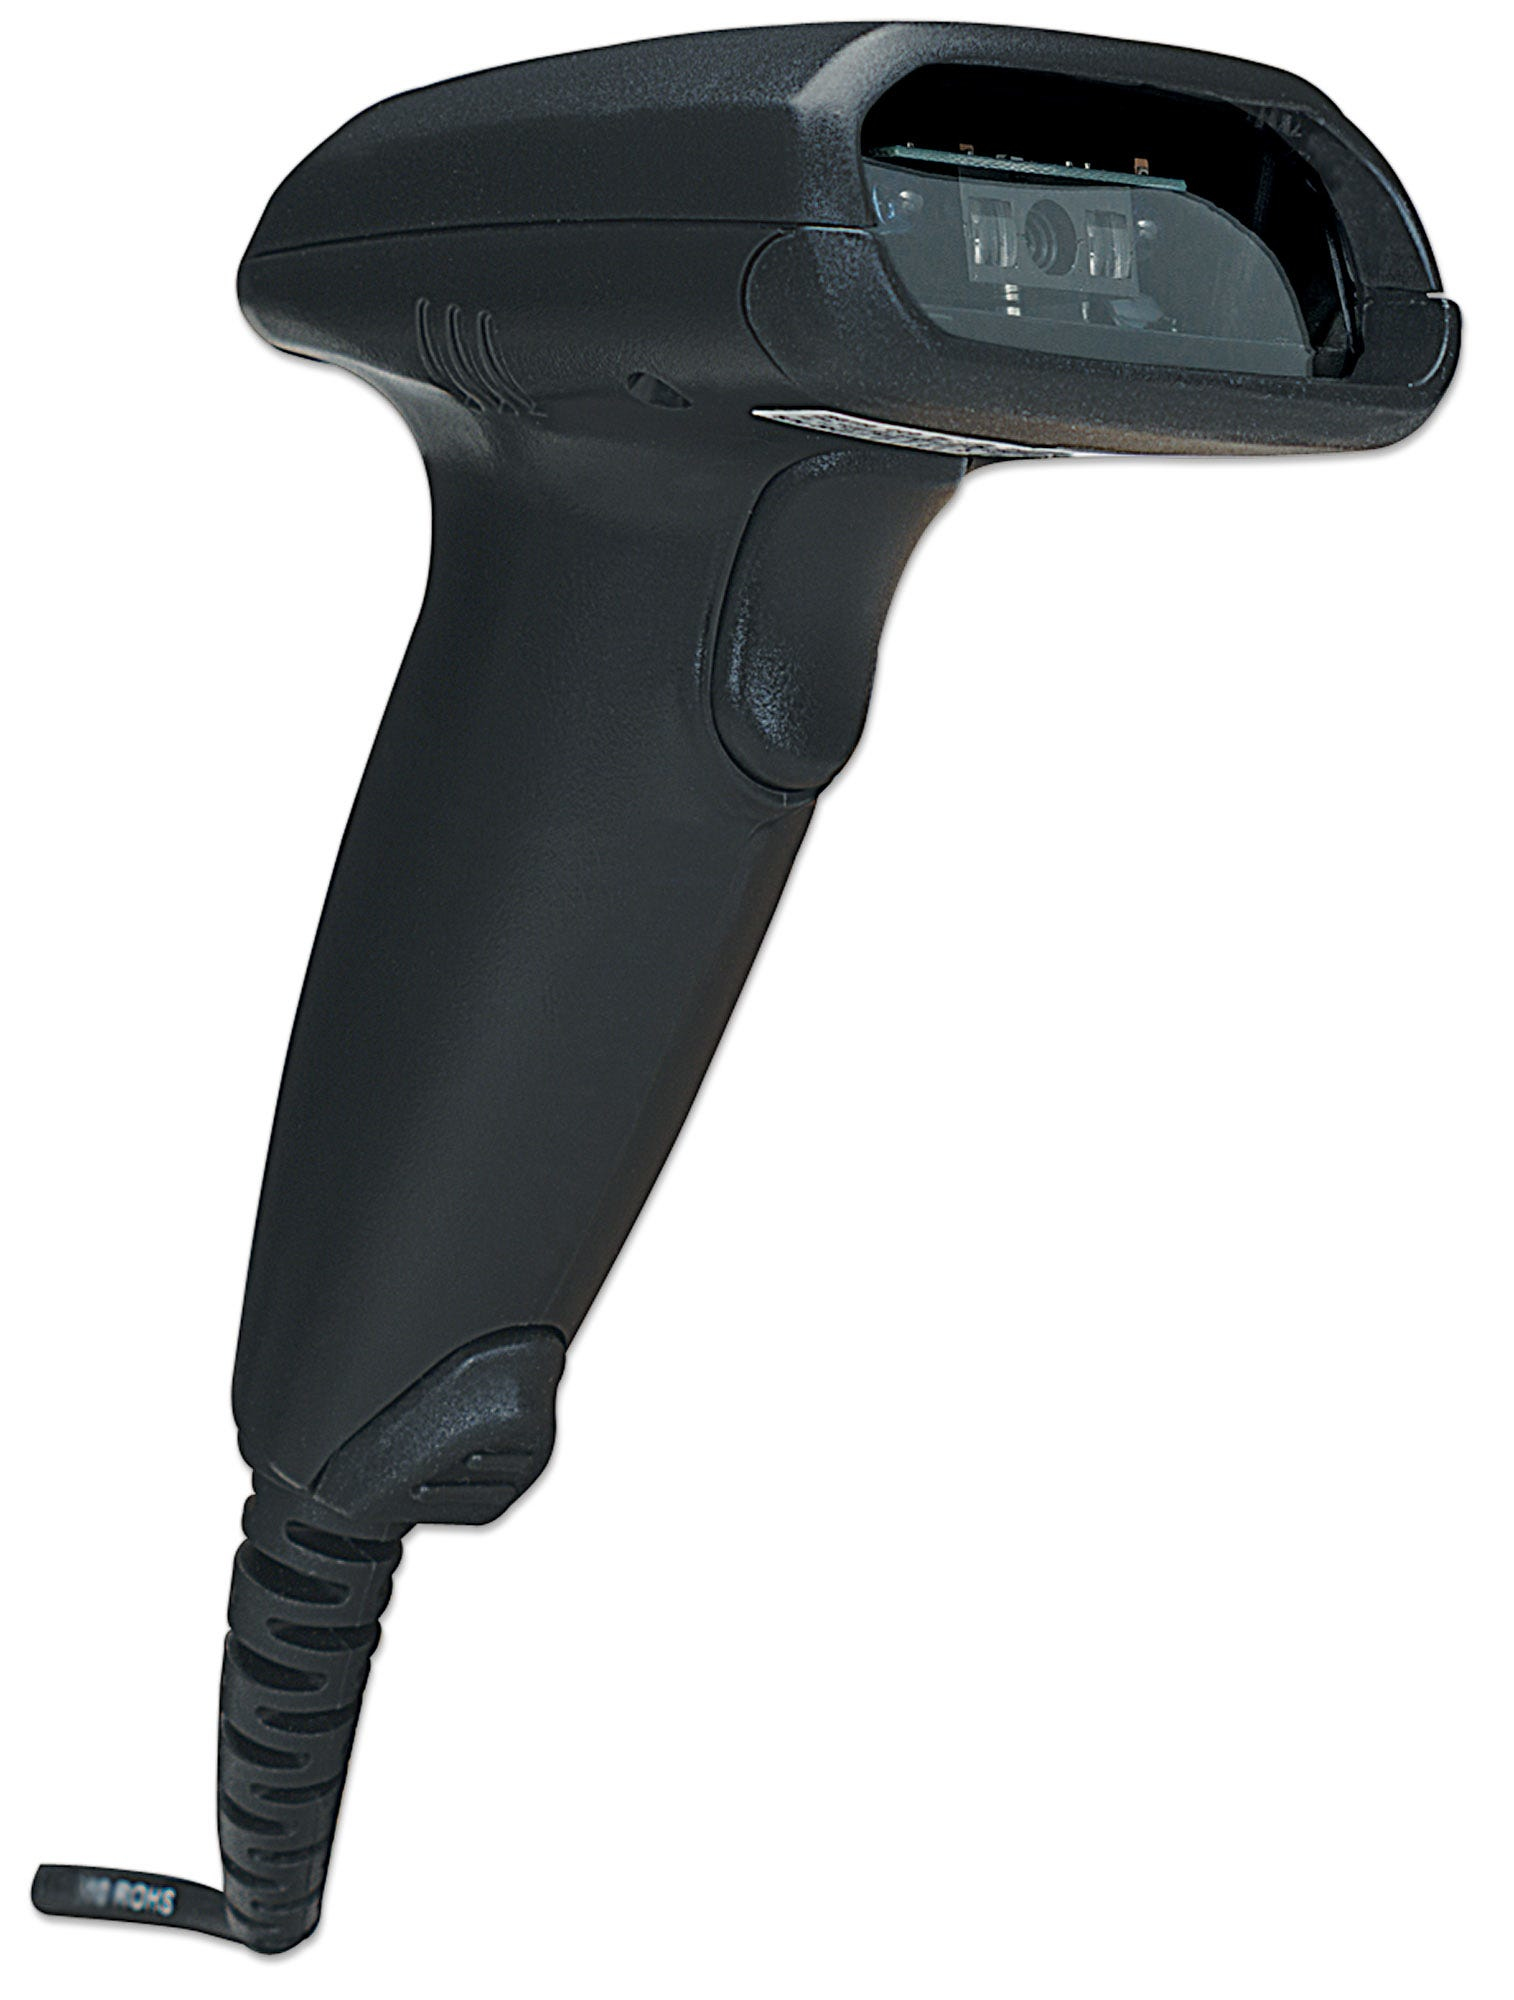 Manhattan Long Range CCD Handheld Barcode Scanner, USB, 500mm Scan Depth, Cable 1.5m, Max Ambient Light 10,000 lux (sunlight)